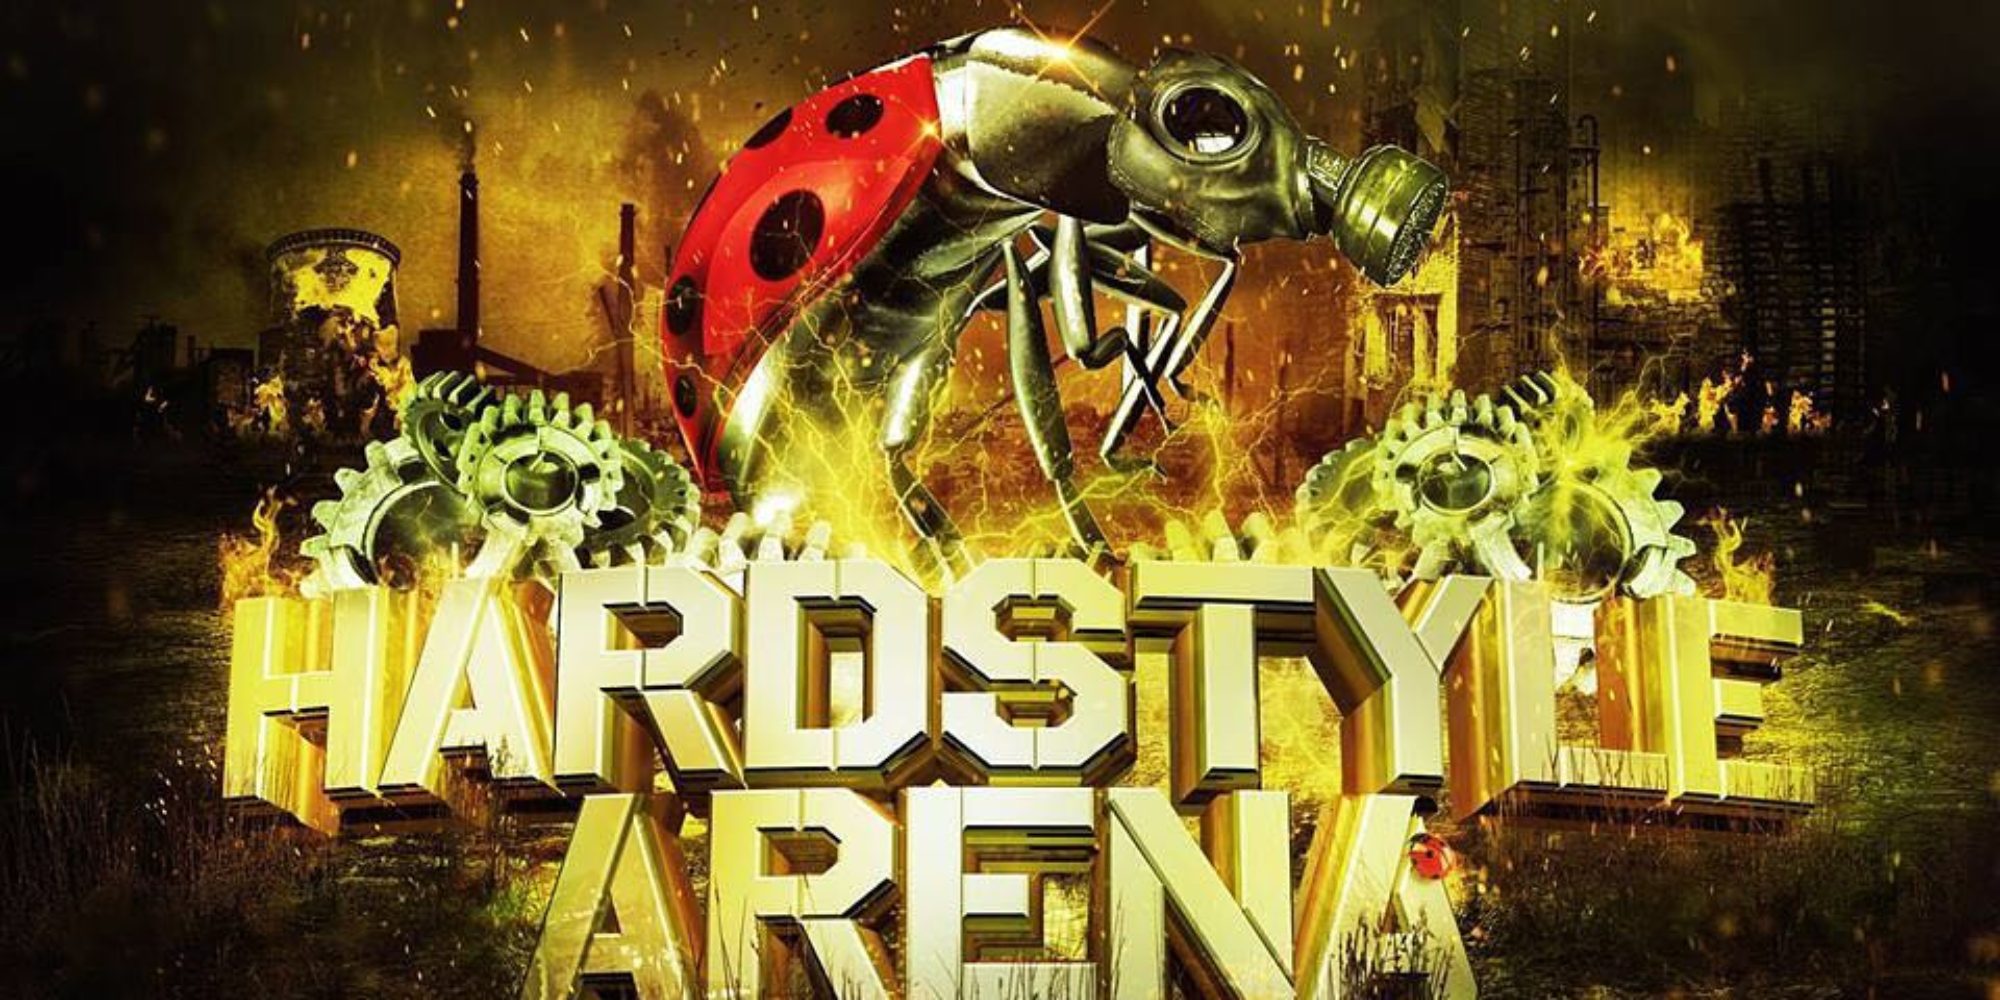 Lets get evil! Evil Activities was just added to rock the ‪HardstyleArena‬